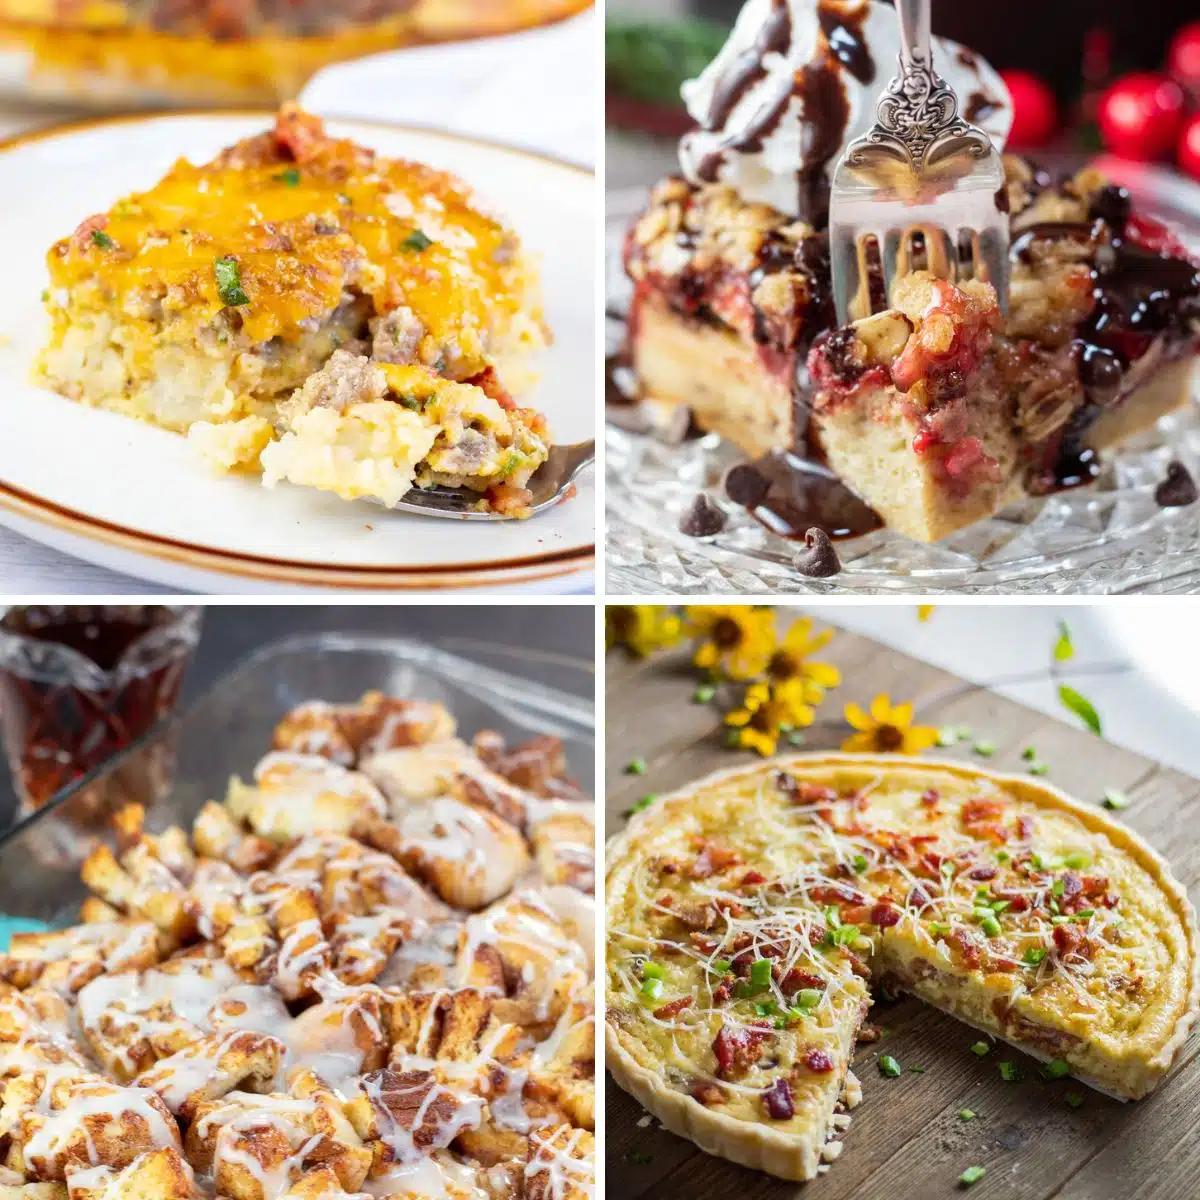 Best breakfast casserole recipes to make including these 4 tasty examples like quiche, french toast casseroles, and more.